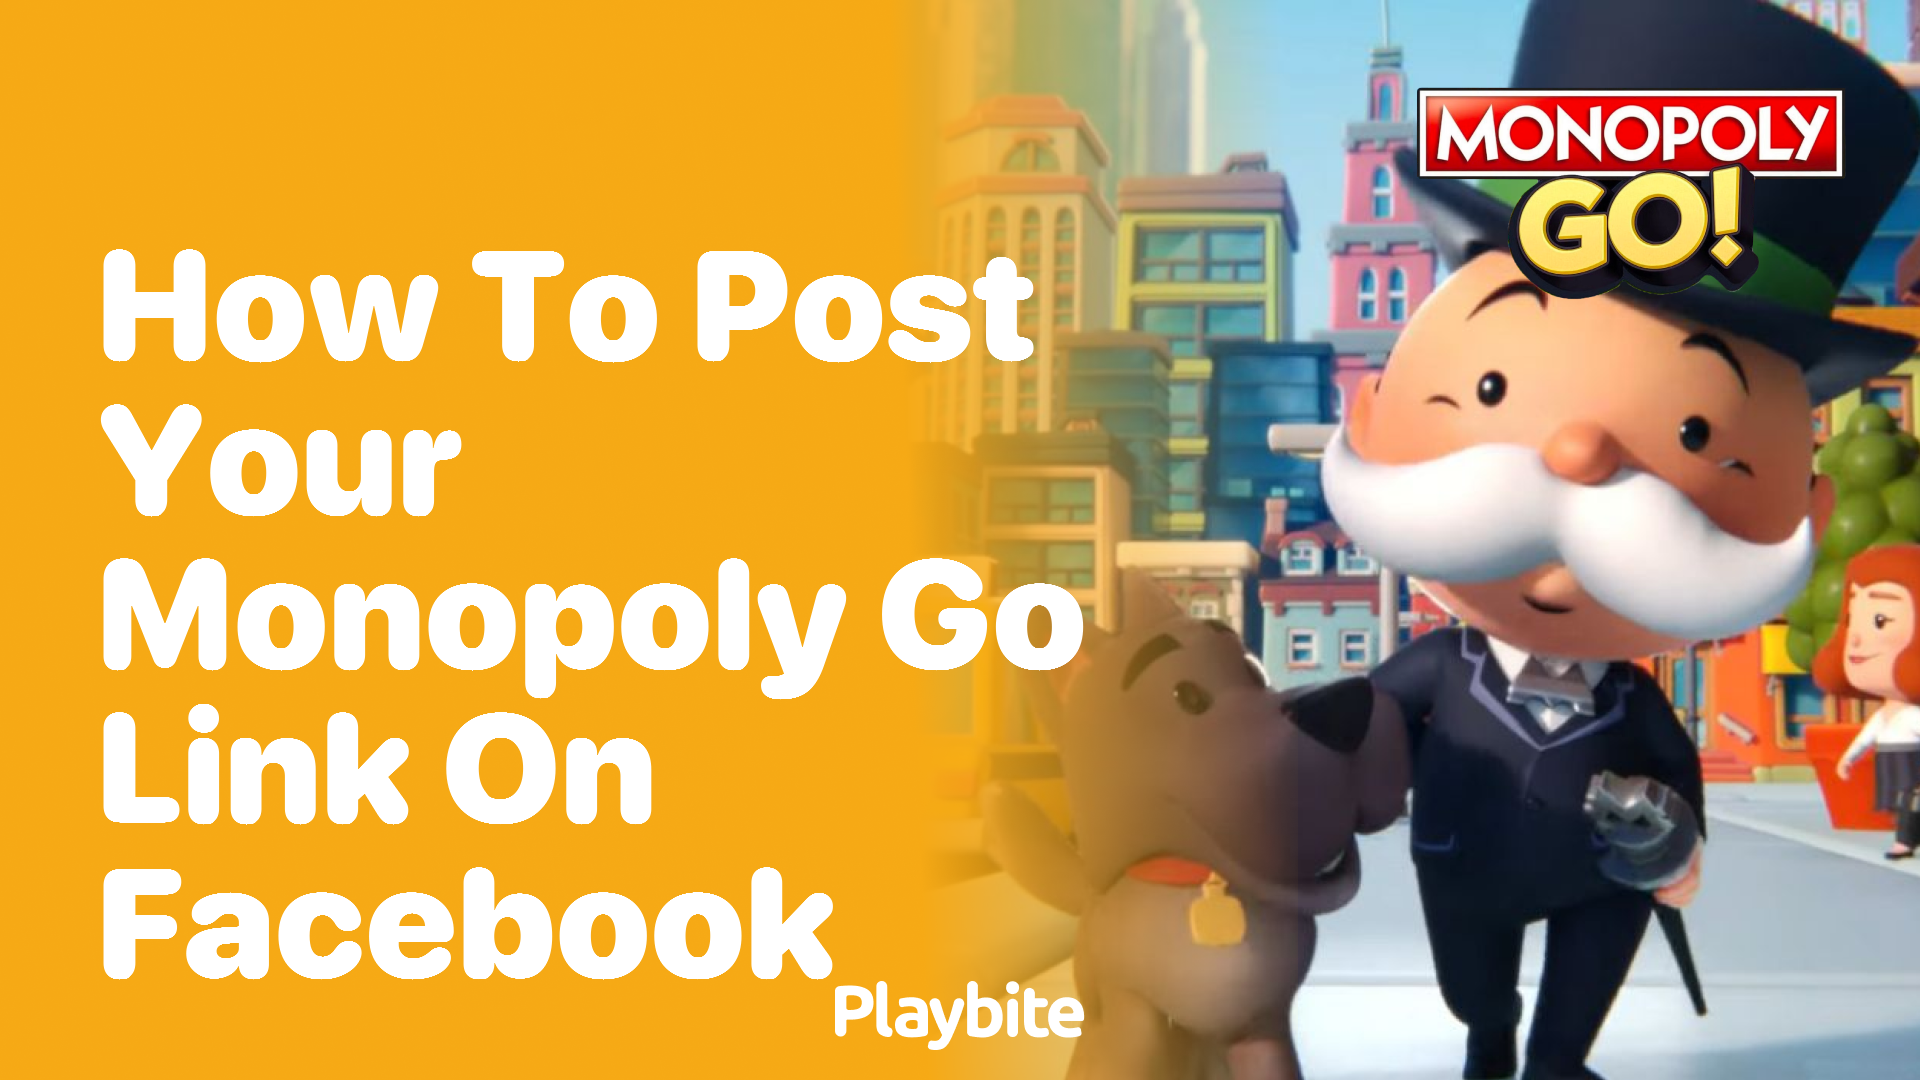 How to Post Your Monopoly Go Link on Facebook